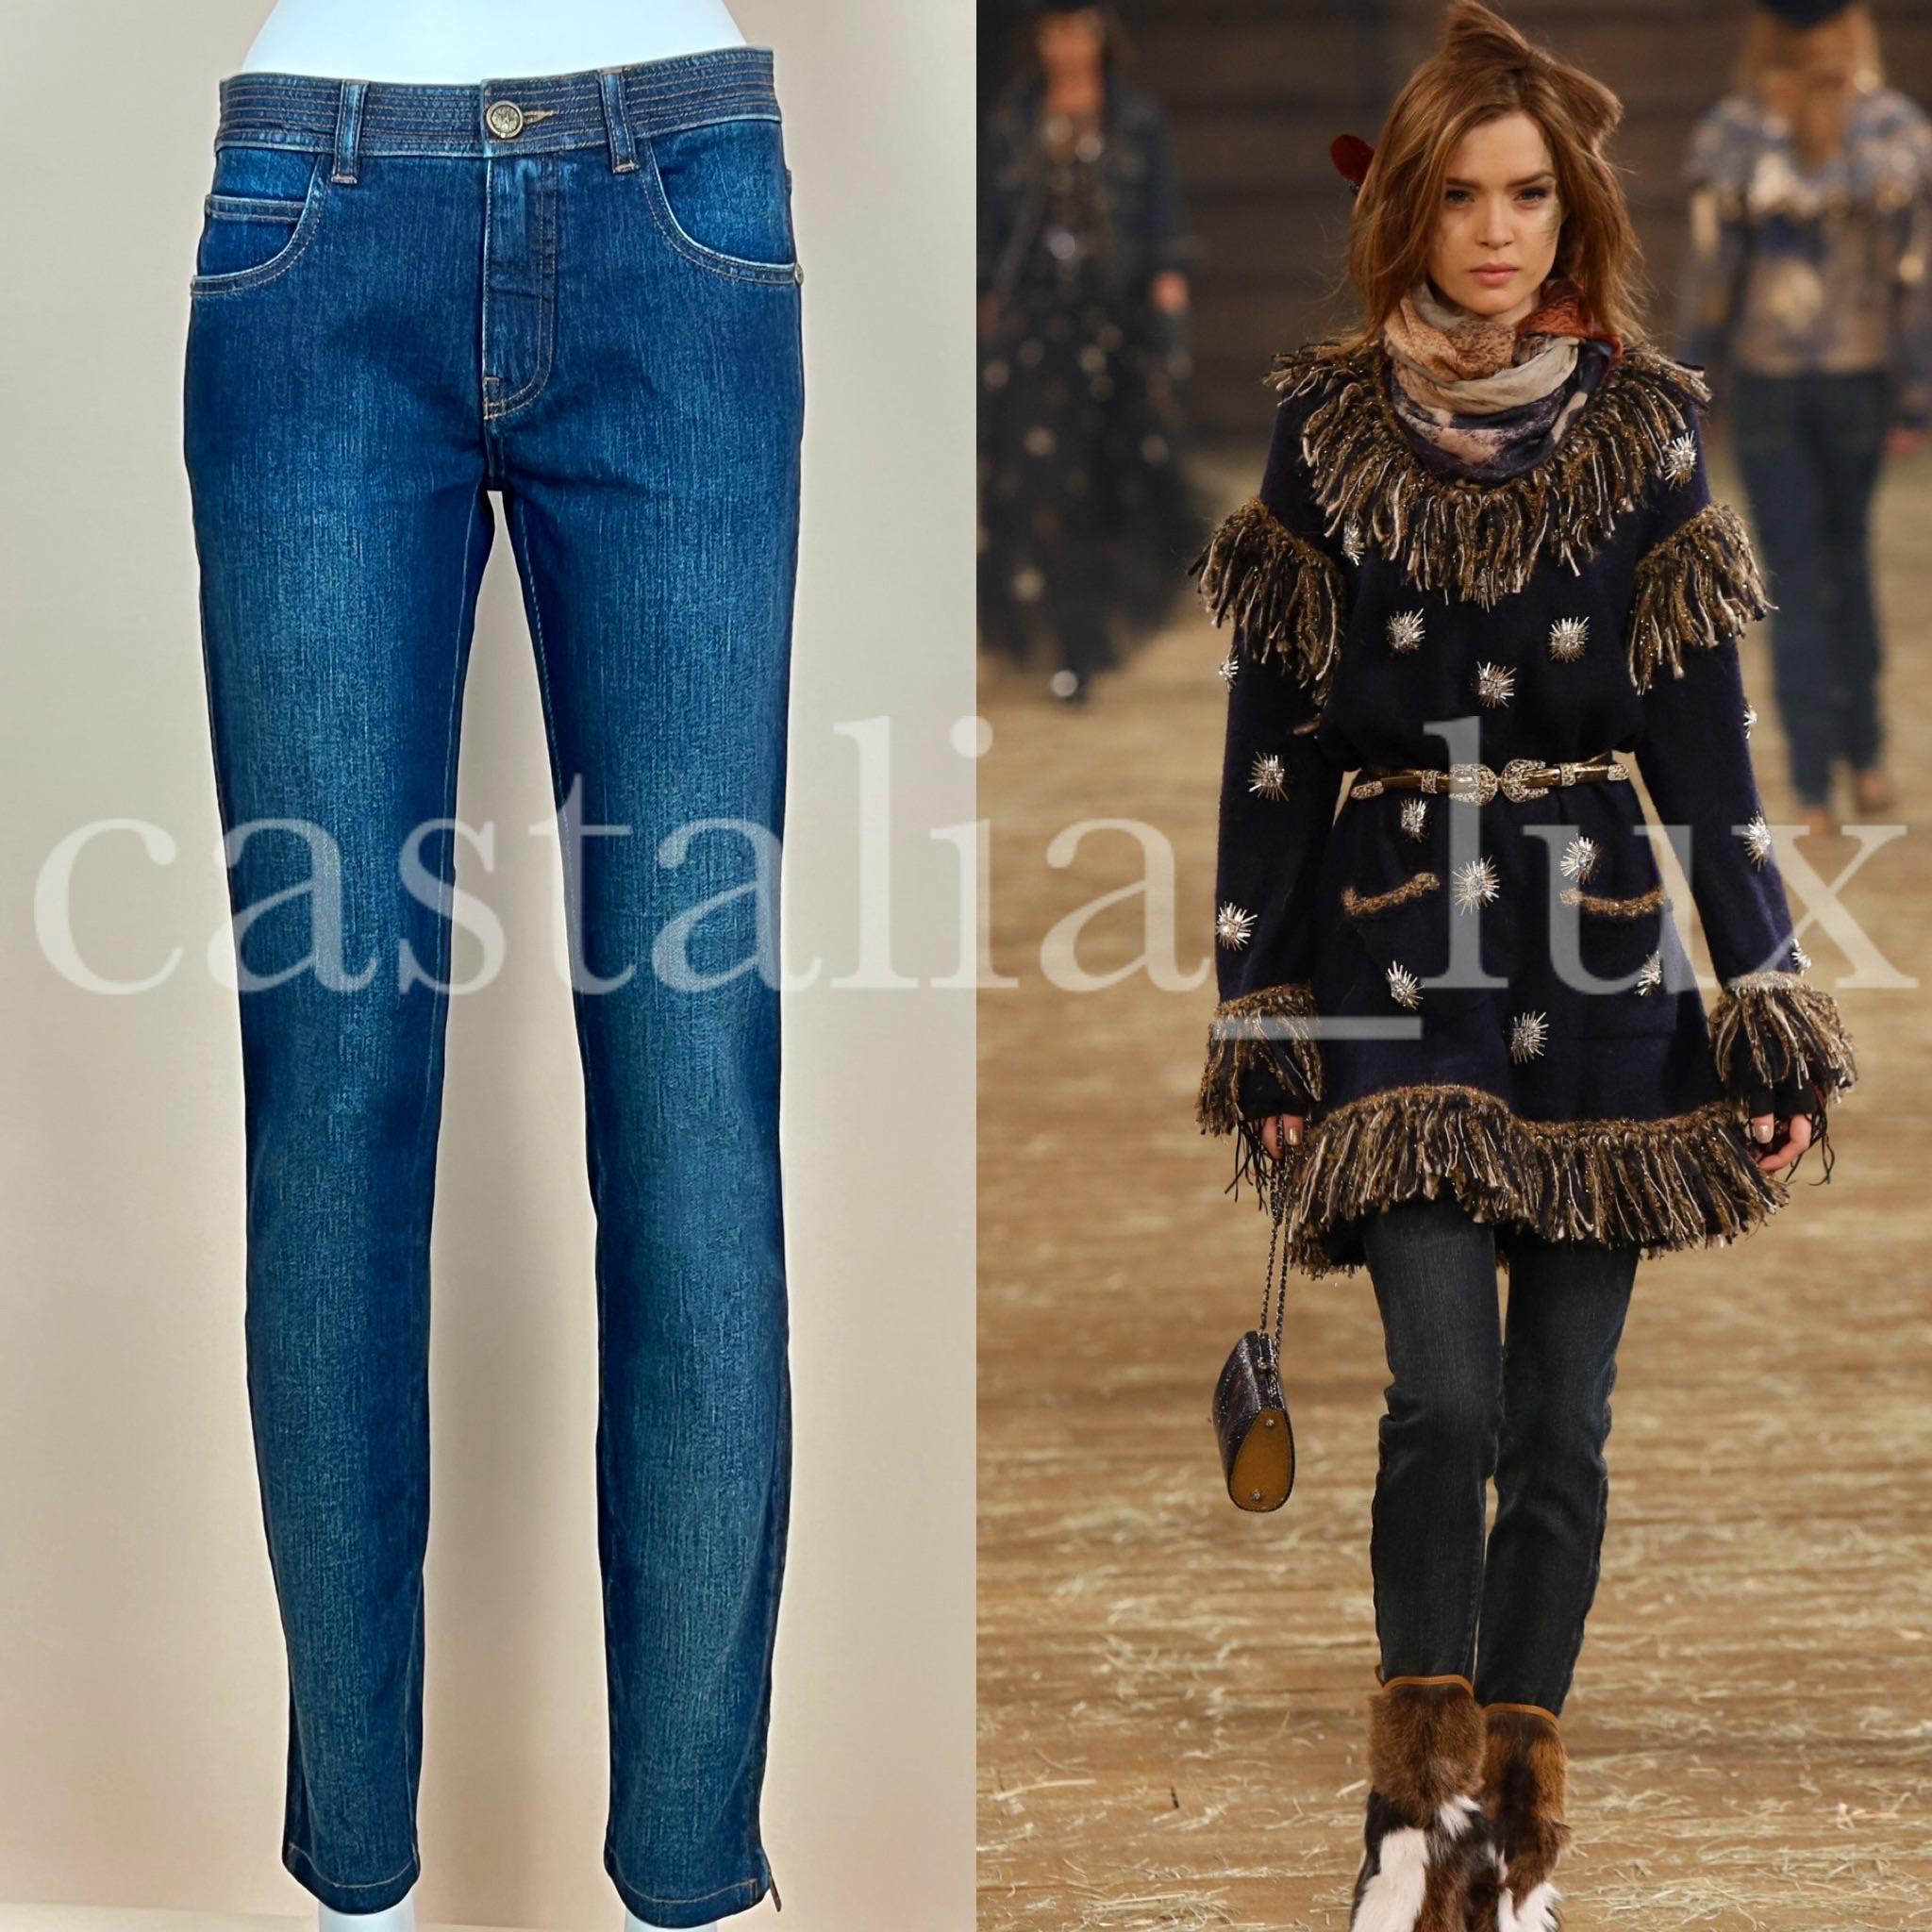 New Chanel navy jeans from Catwalk of Paris / DALLAS Collection
Boutique price 2,200€
- CC logo buttons and studs
- CC logo zippers
Size mark 36 FR. Never worn.